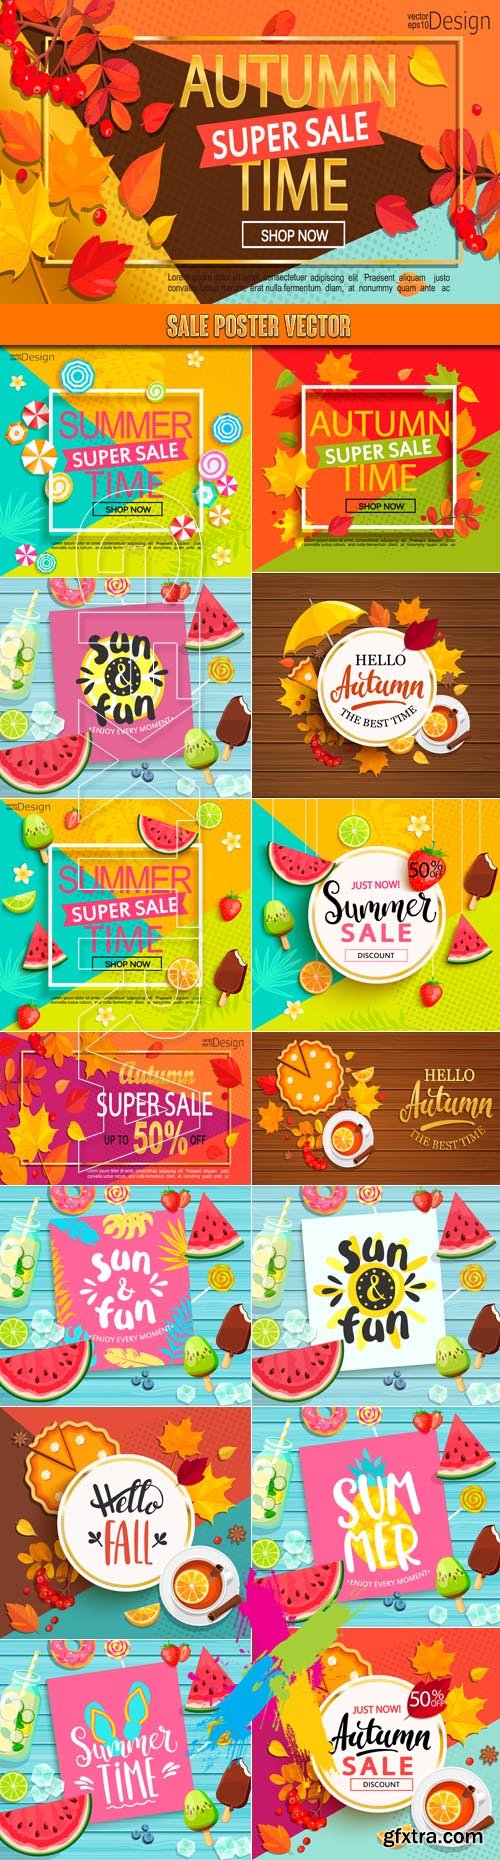 Sale poster vector